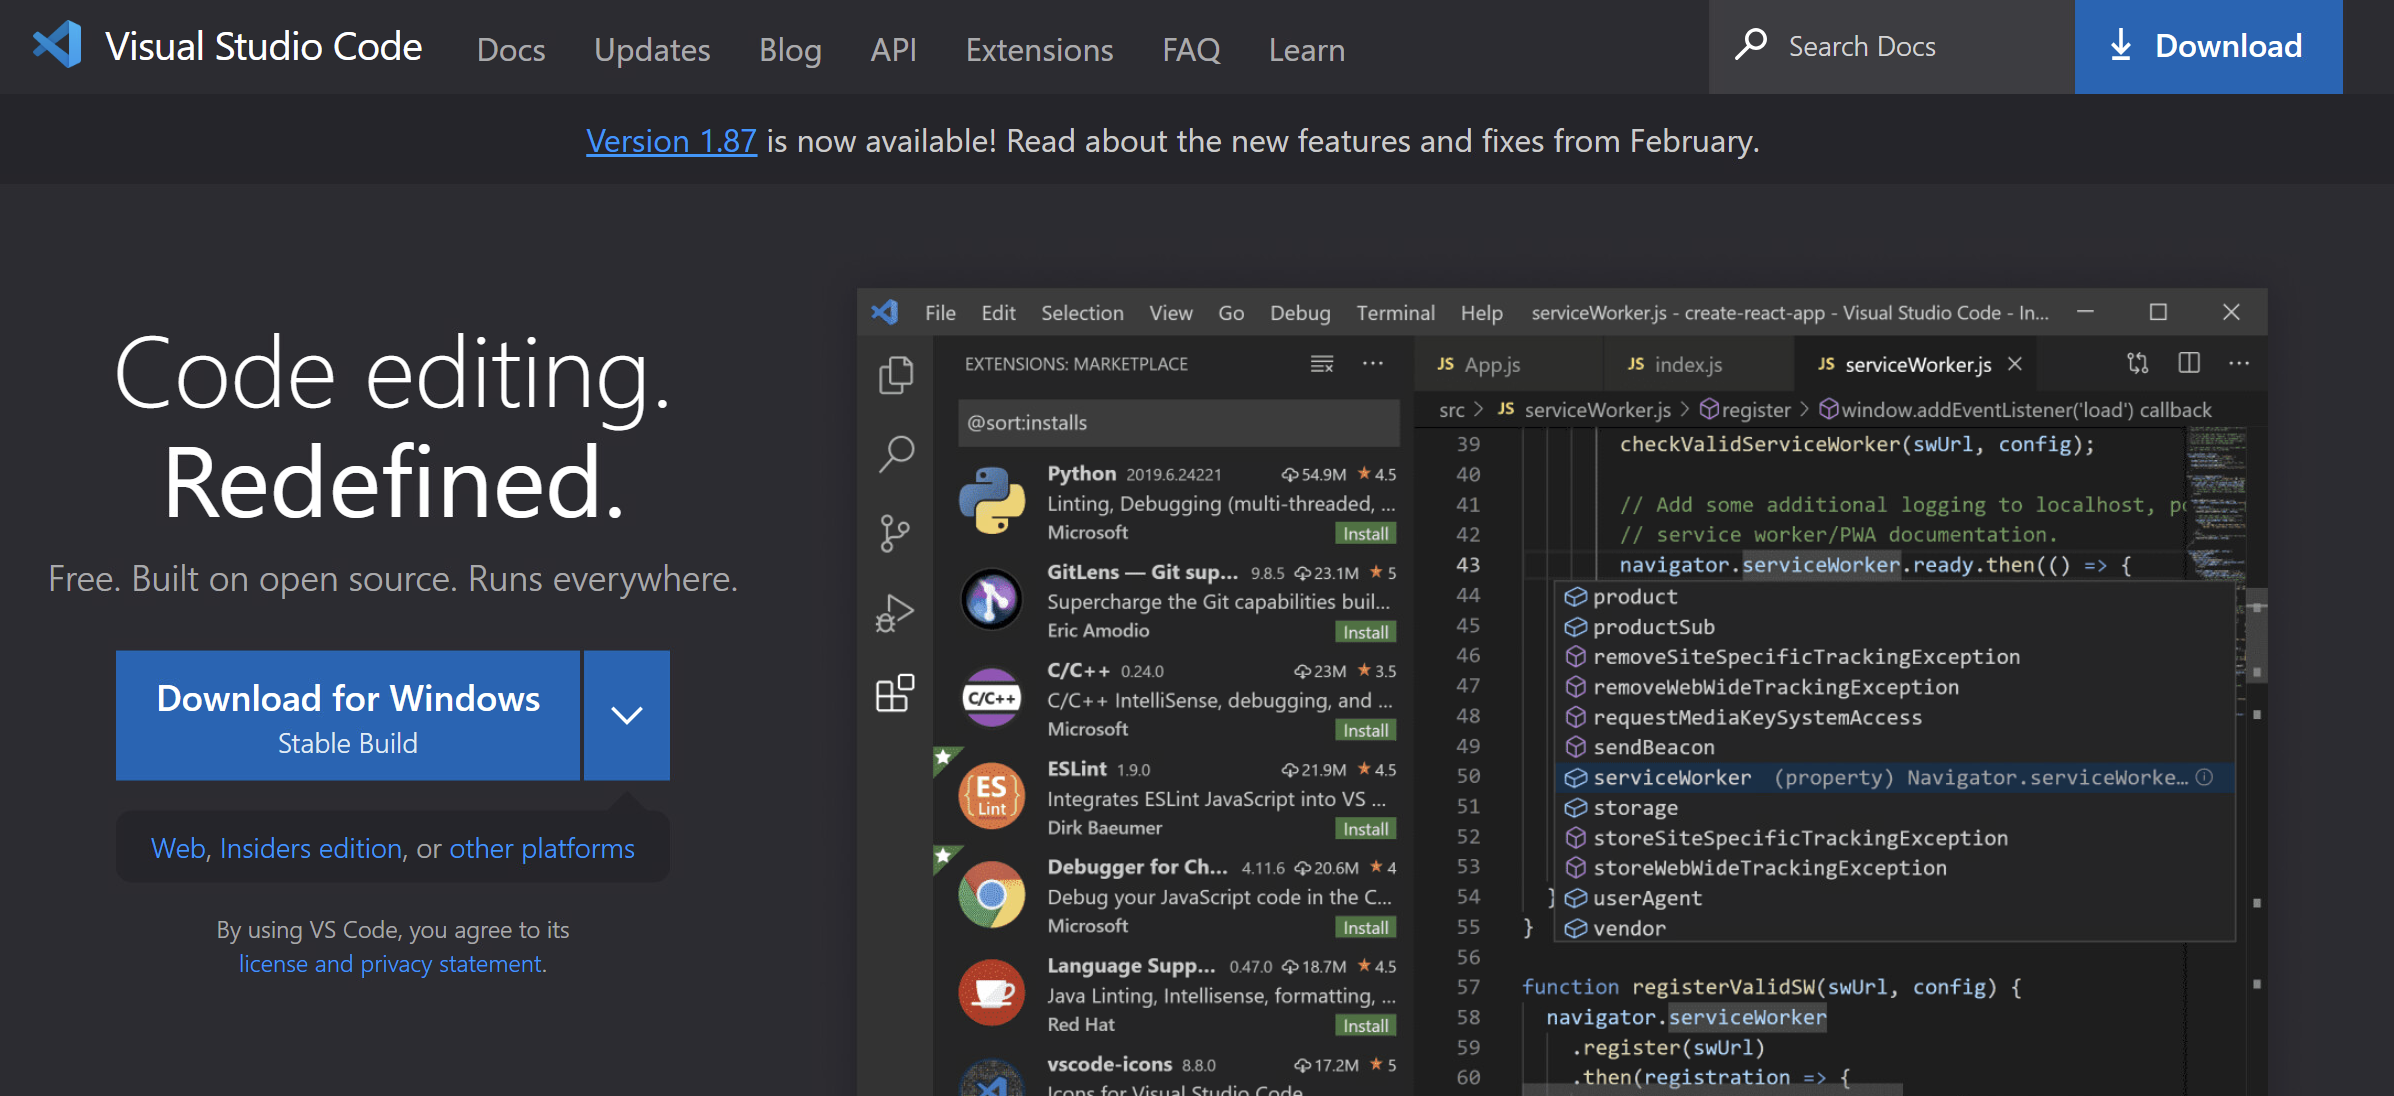 Screenshot showing the Visual Studio Code download page with download options for different operating systems.